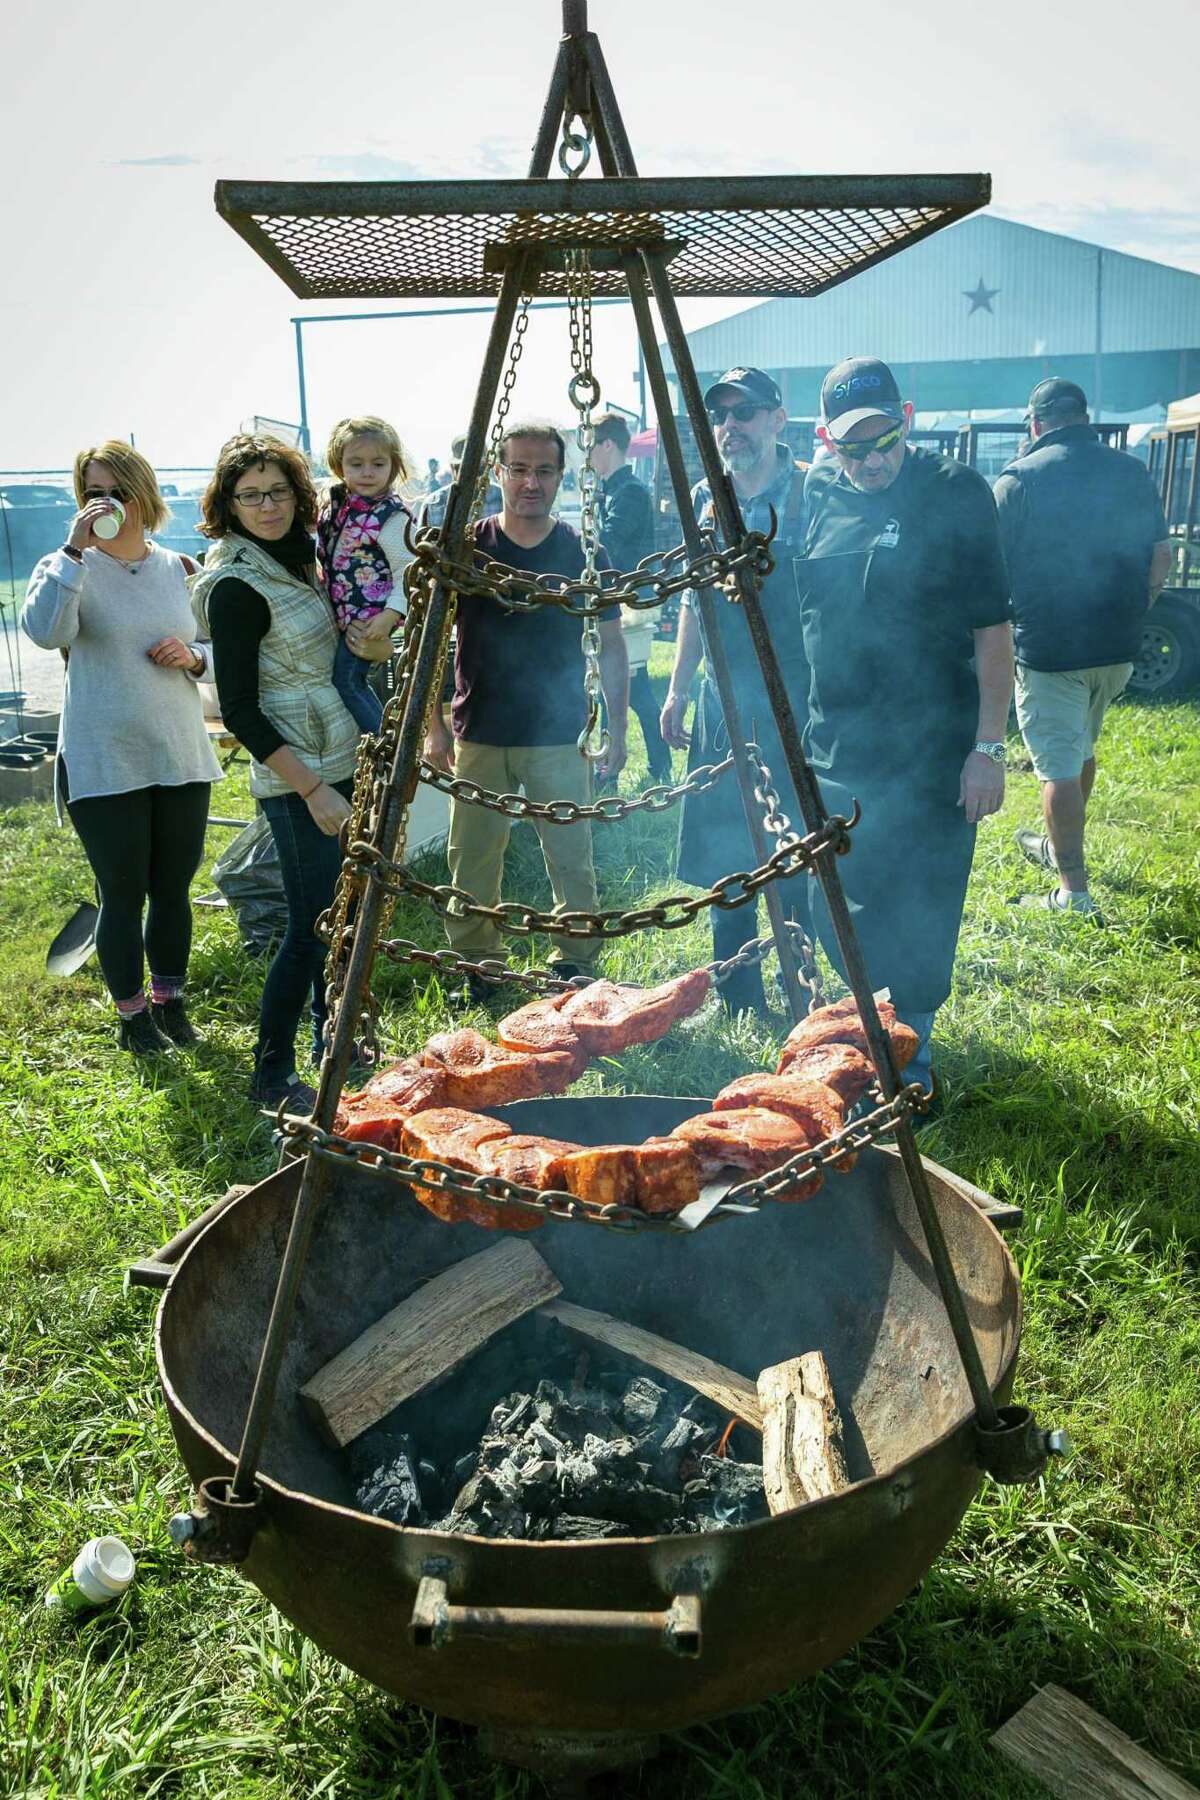 The fourth annual Butcher's Ball, showcasing ethical and sustainable ranching and farming in Texas, will be held Oct. 20, 2019 in Brenham. Shown: Live fire cooking.